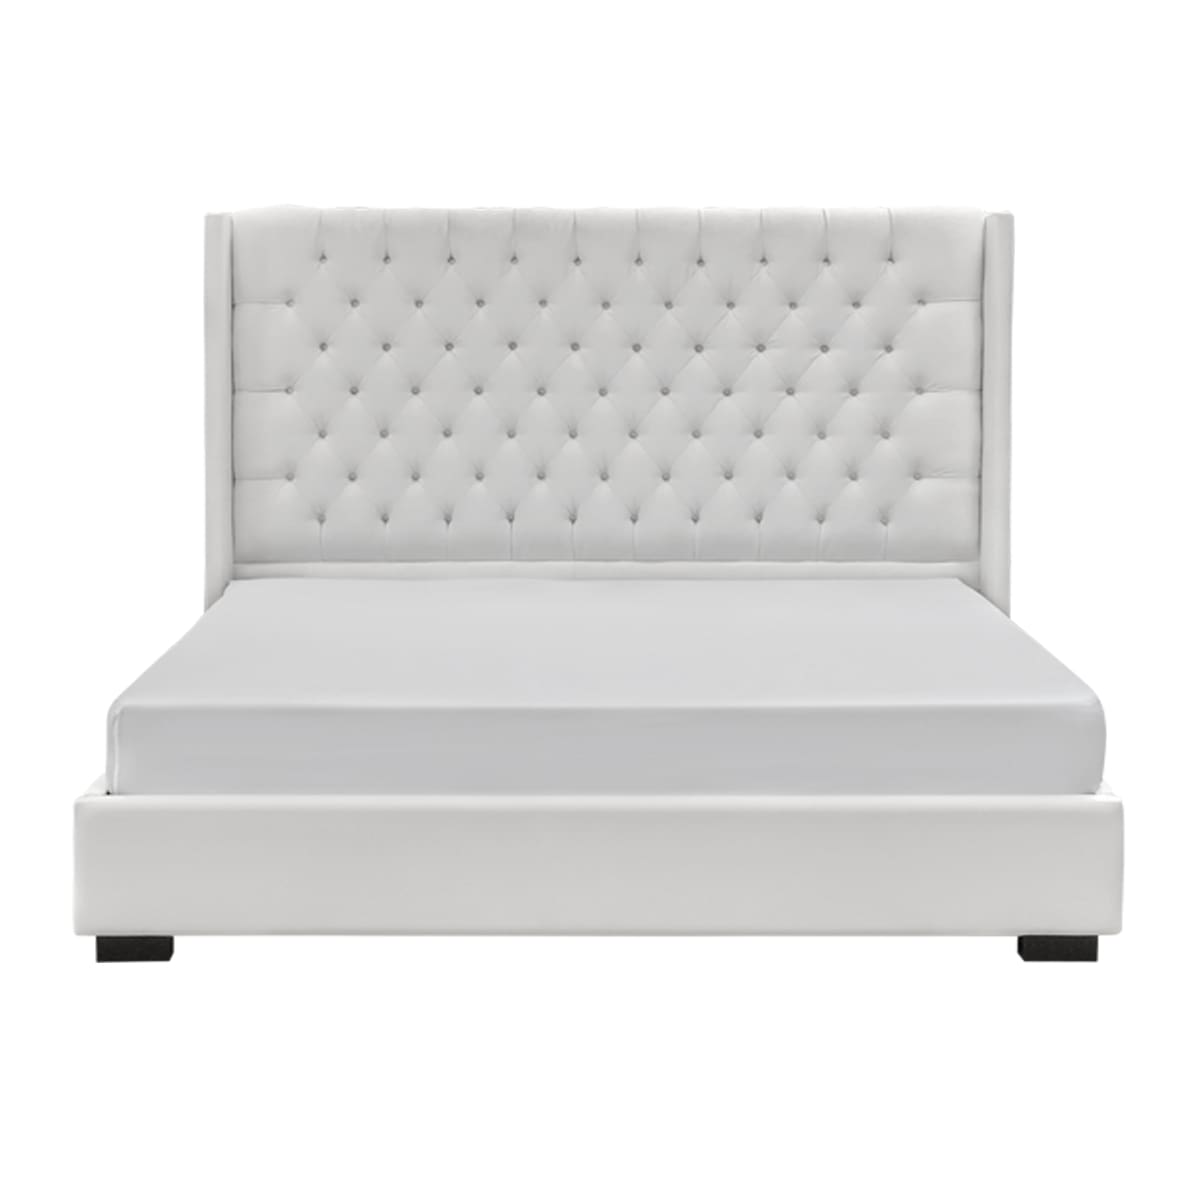 Panama Upholstery Bed - $1799.99 - BED